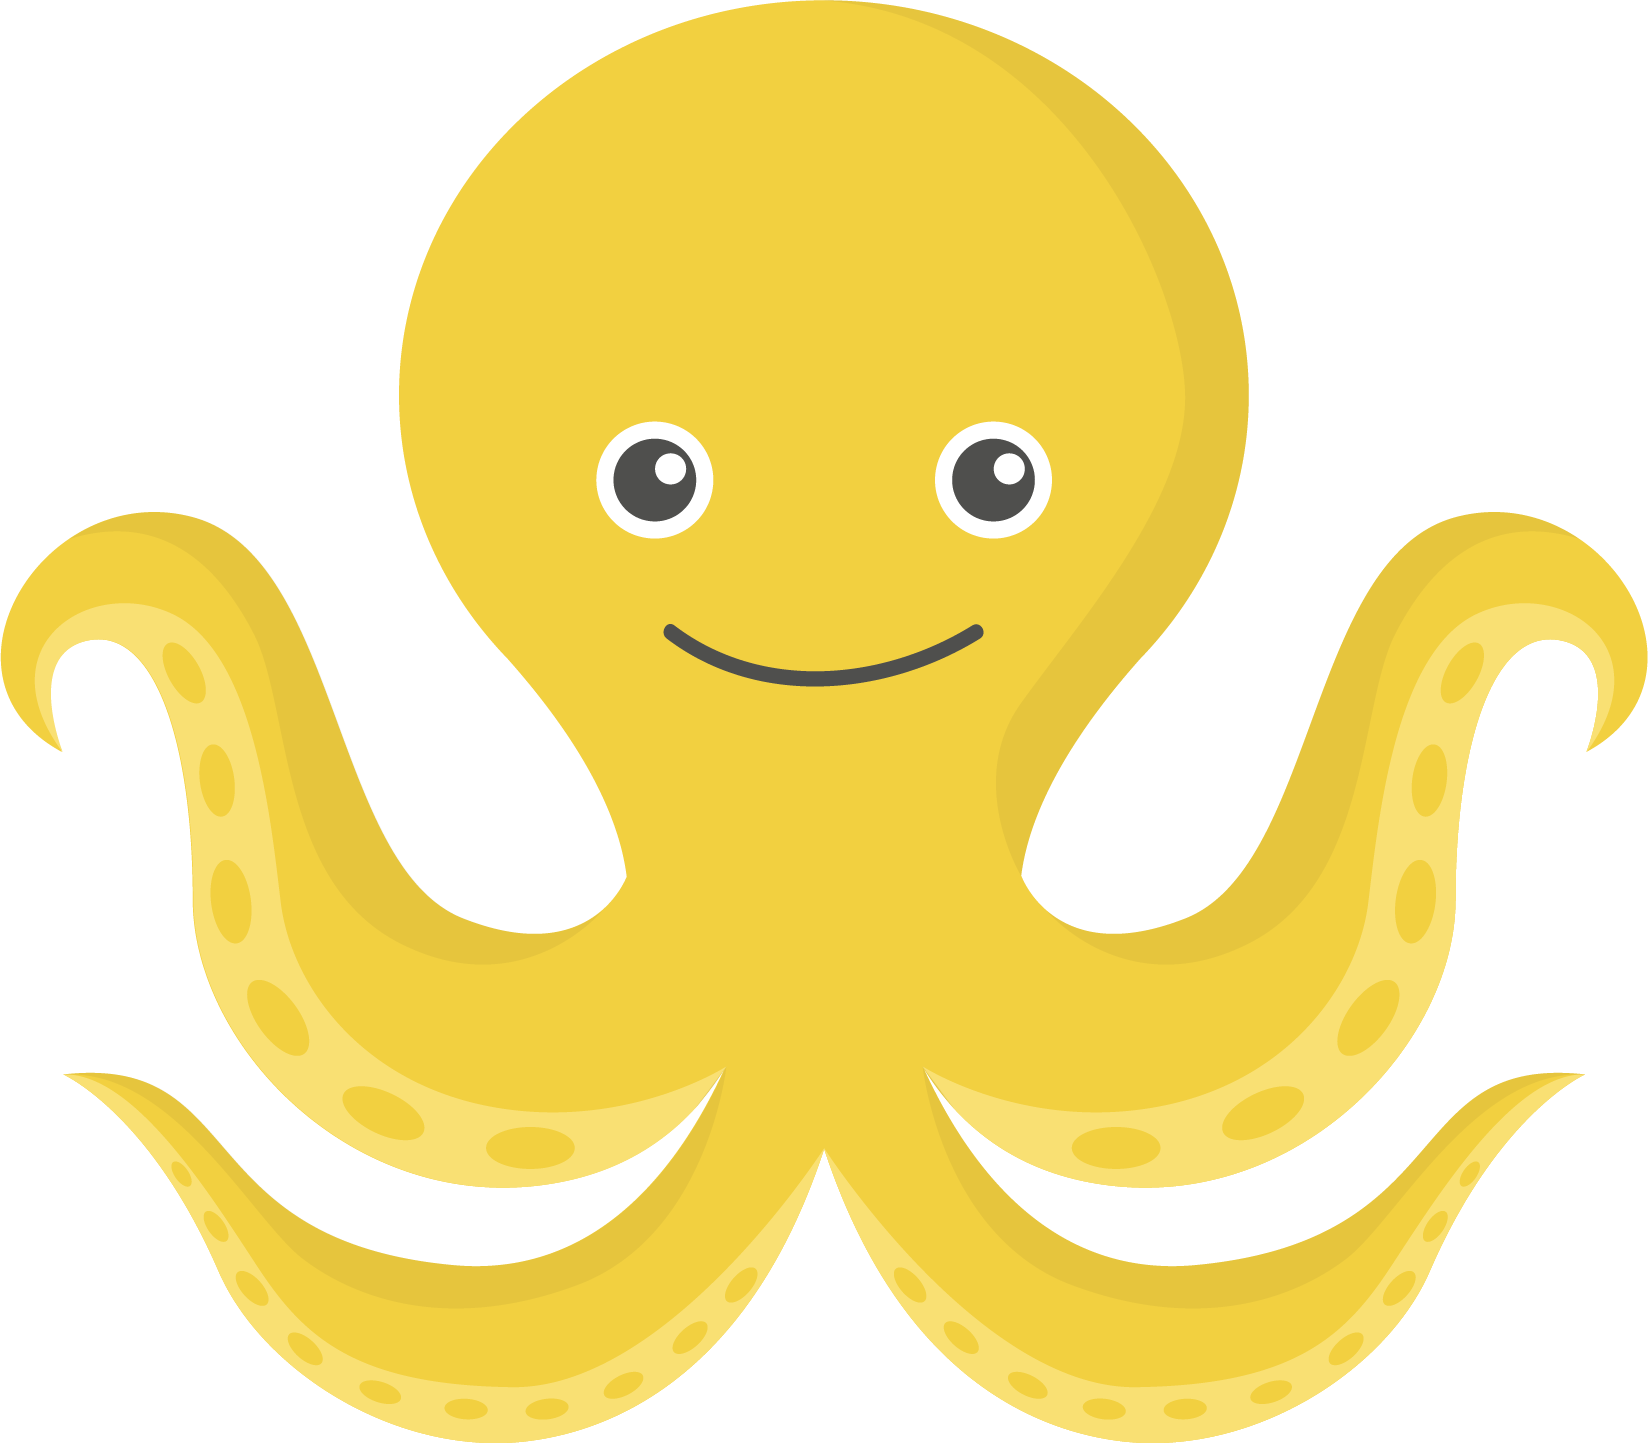 Png transparent images only. Free clipart octopus